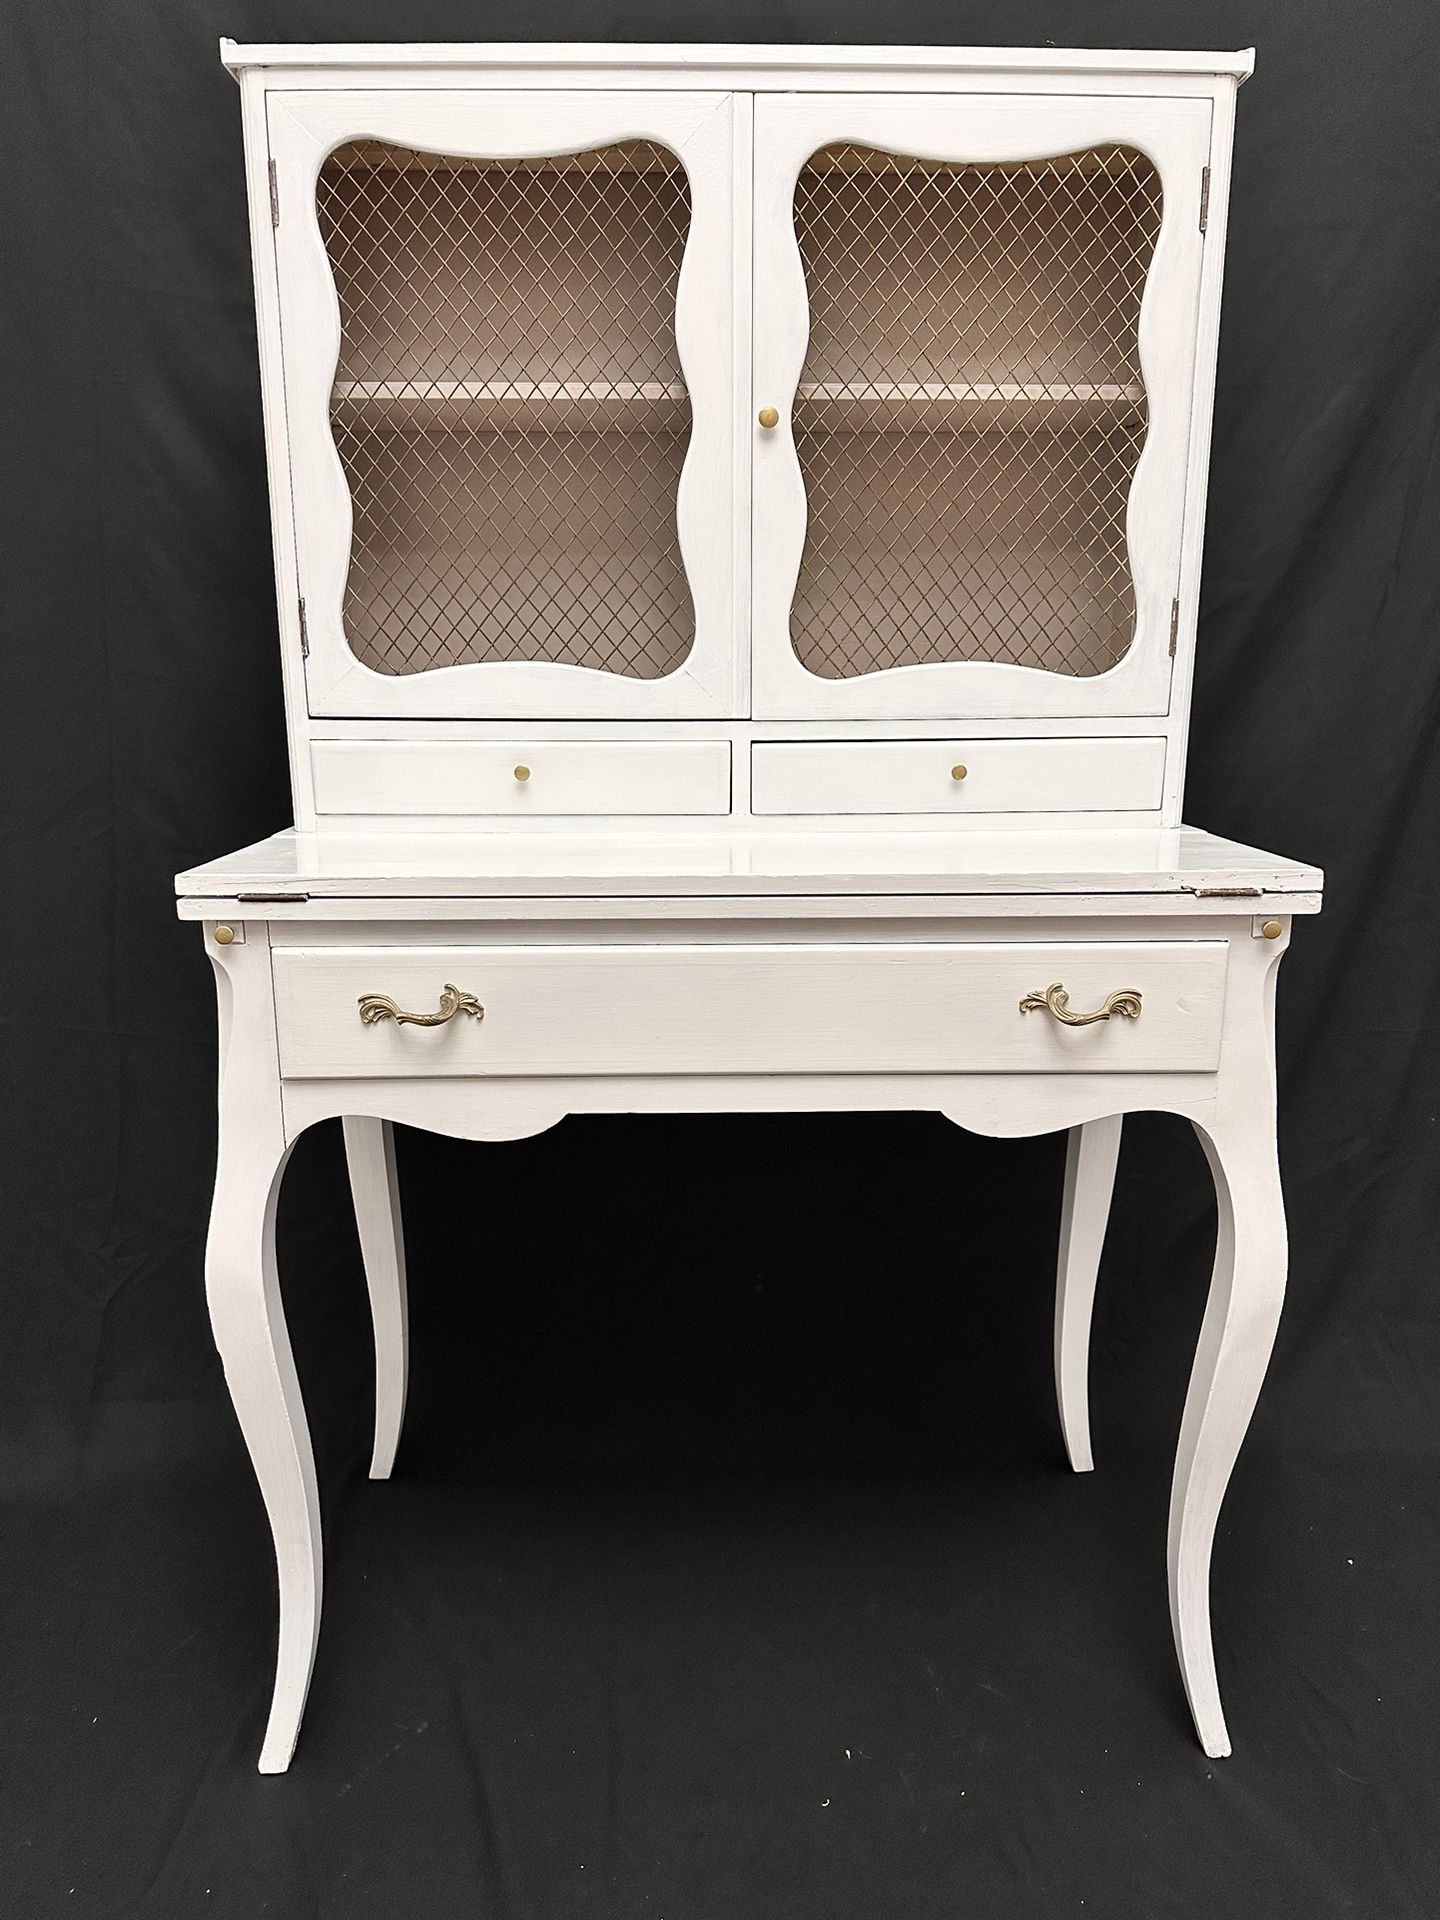 FRENCH COUNTRY VINTAGE REFINISHED WOMAN’S SECRETARY - LIKE NEW!